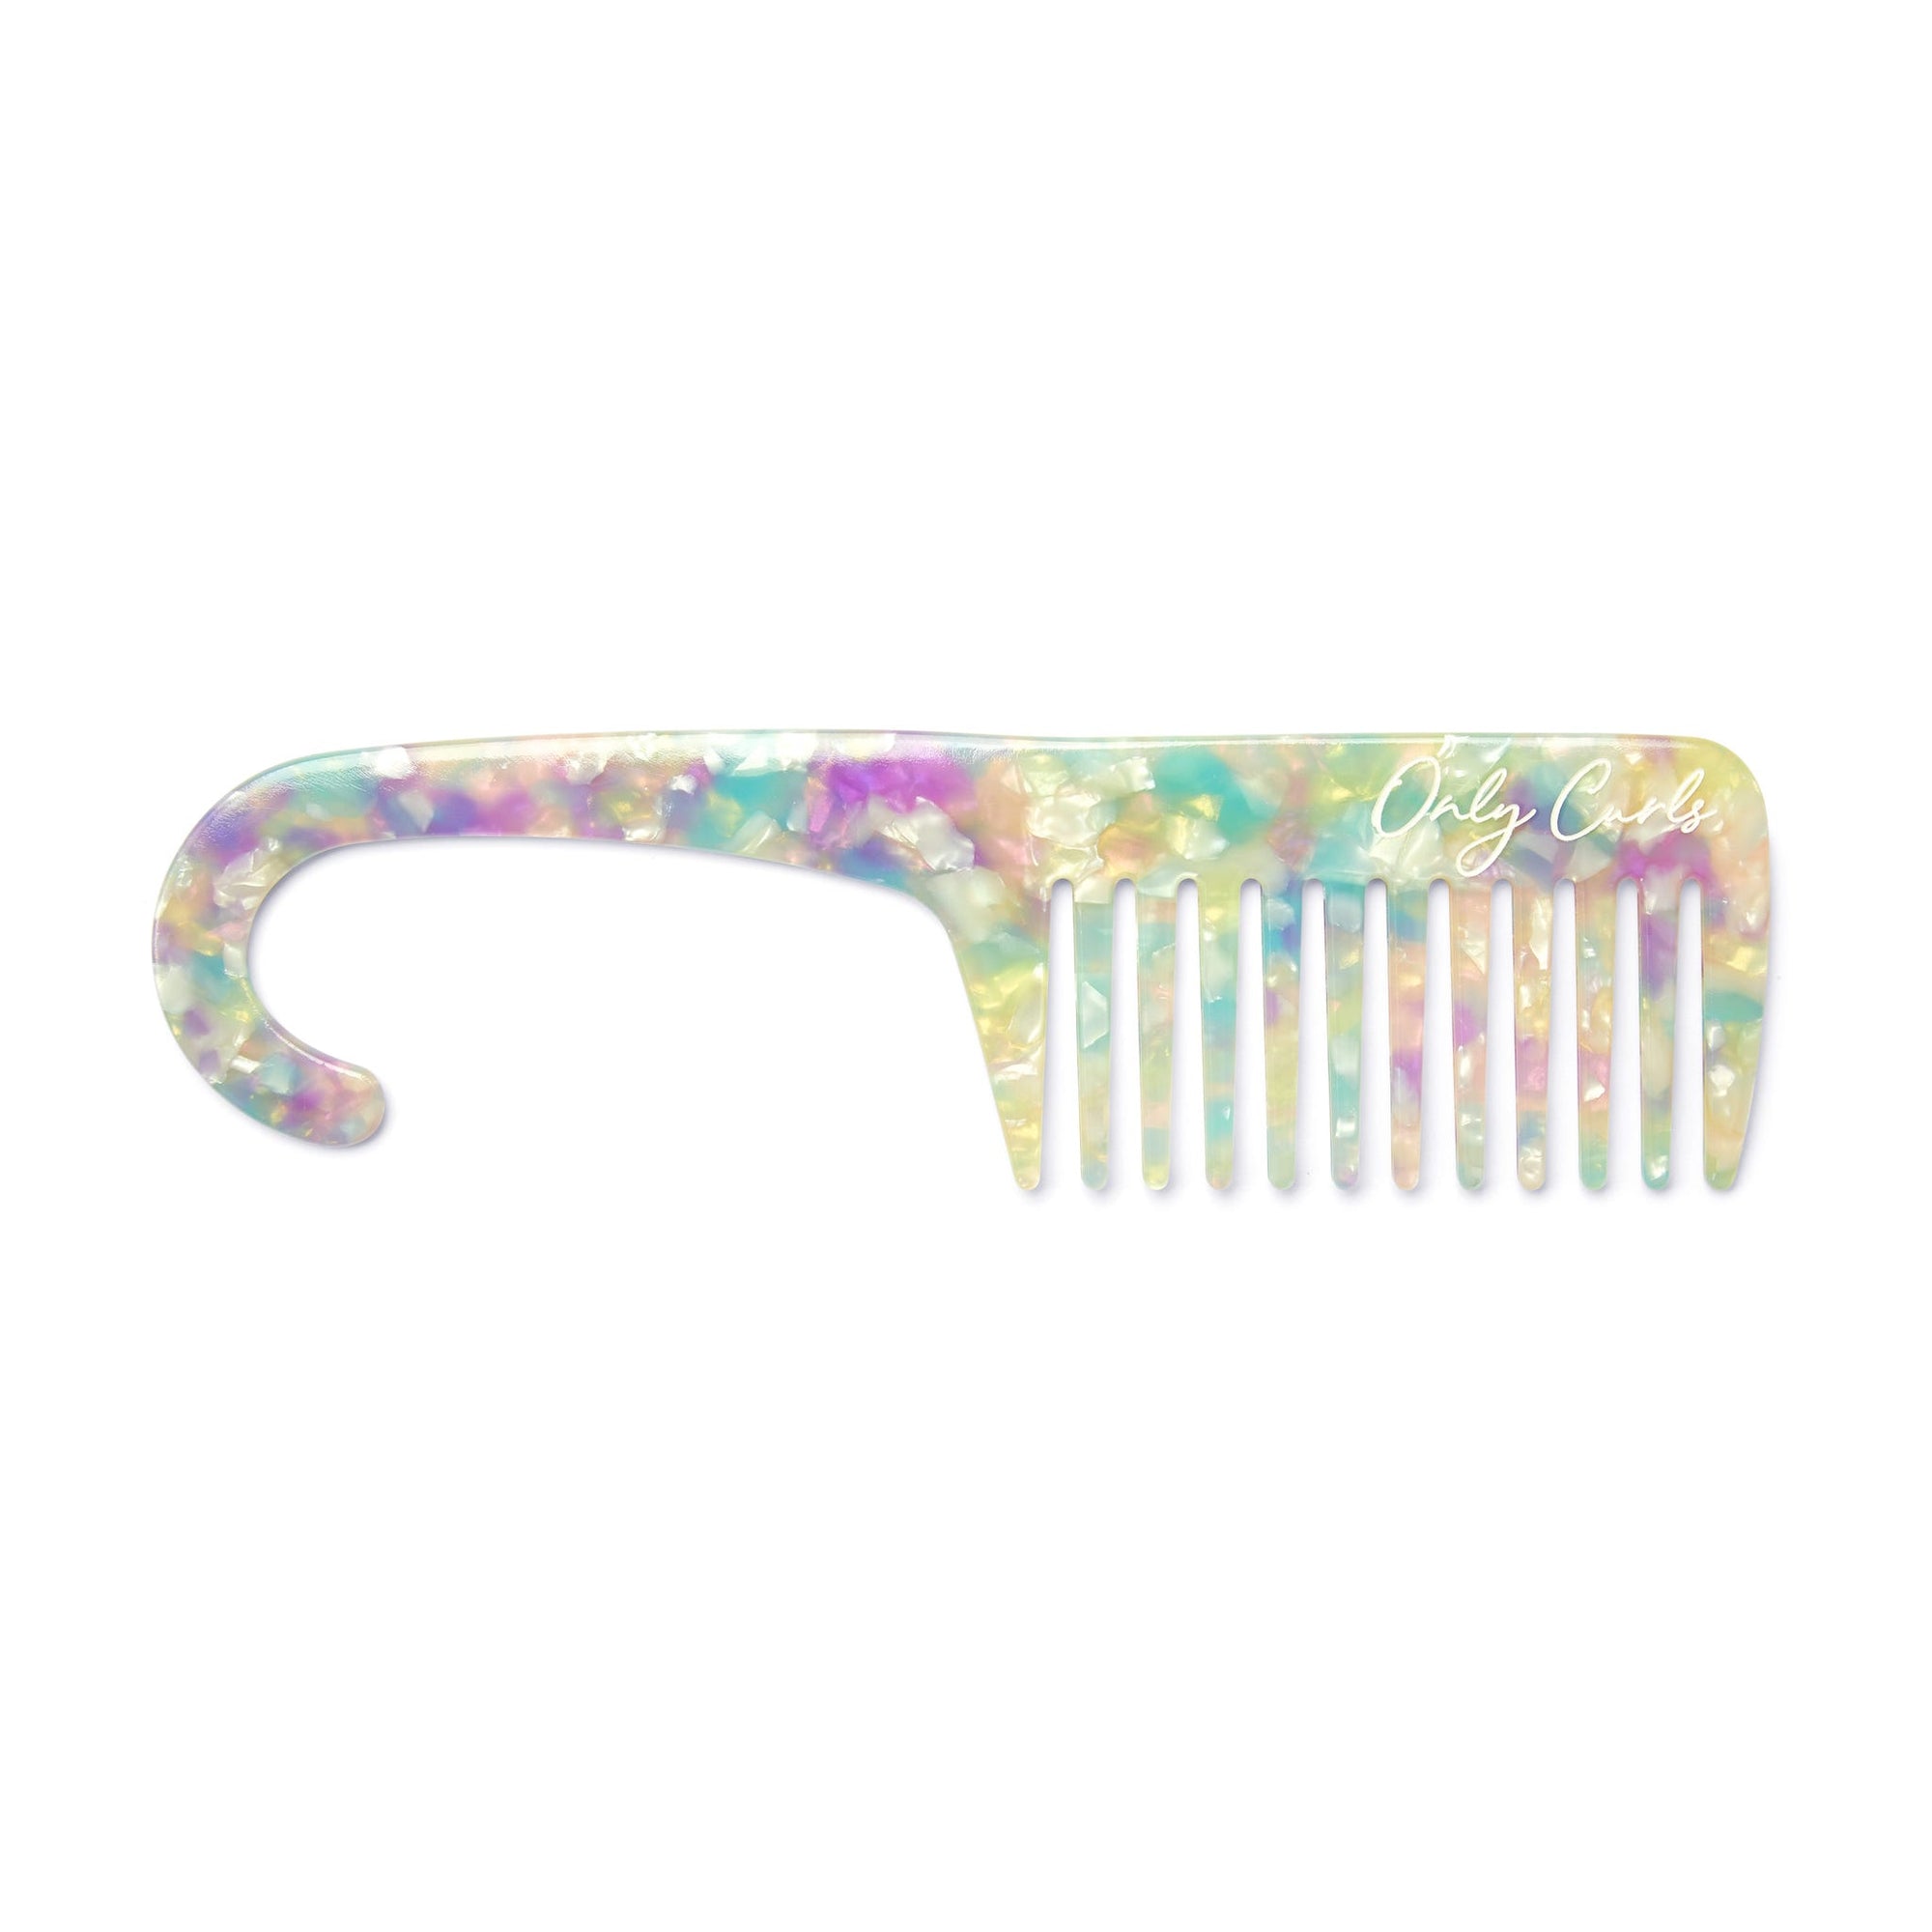 Only Curls Pastel Shower Comb - Only Curls